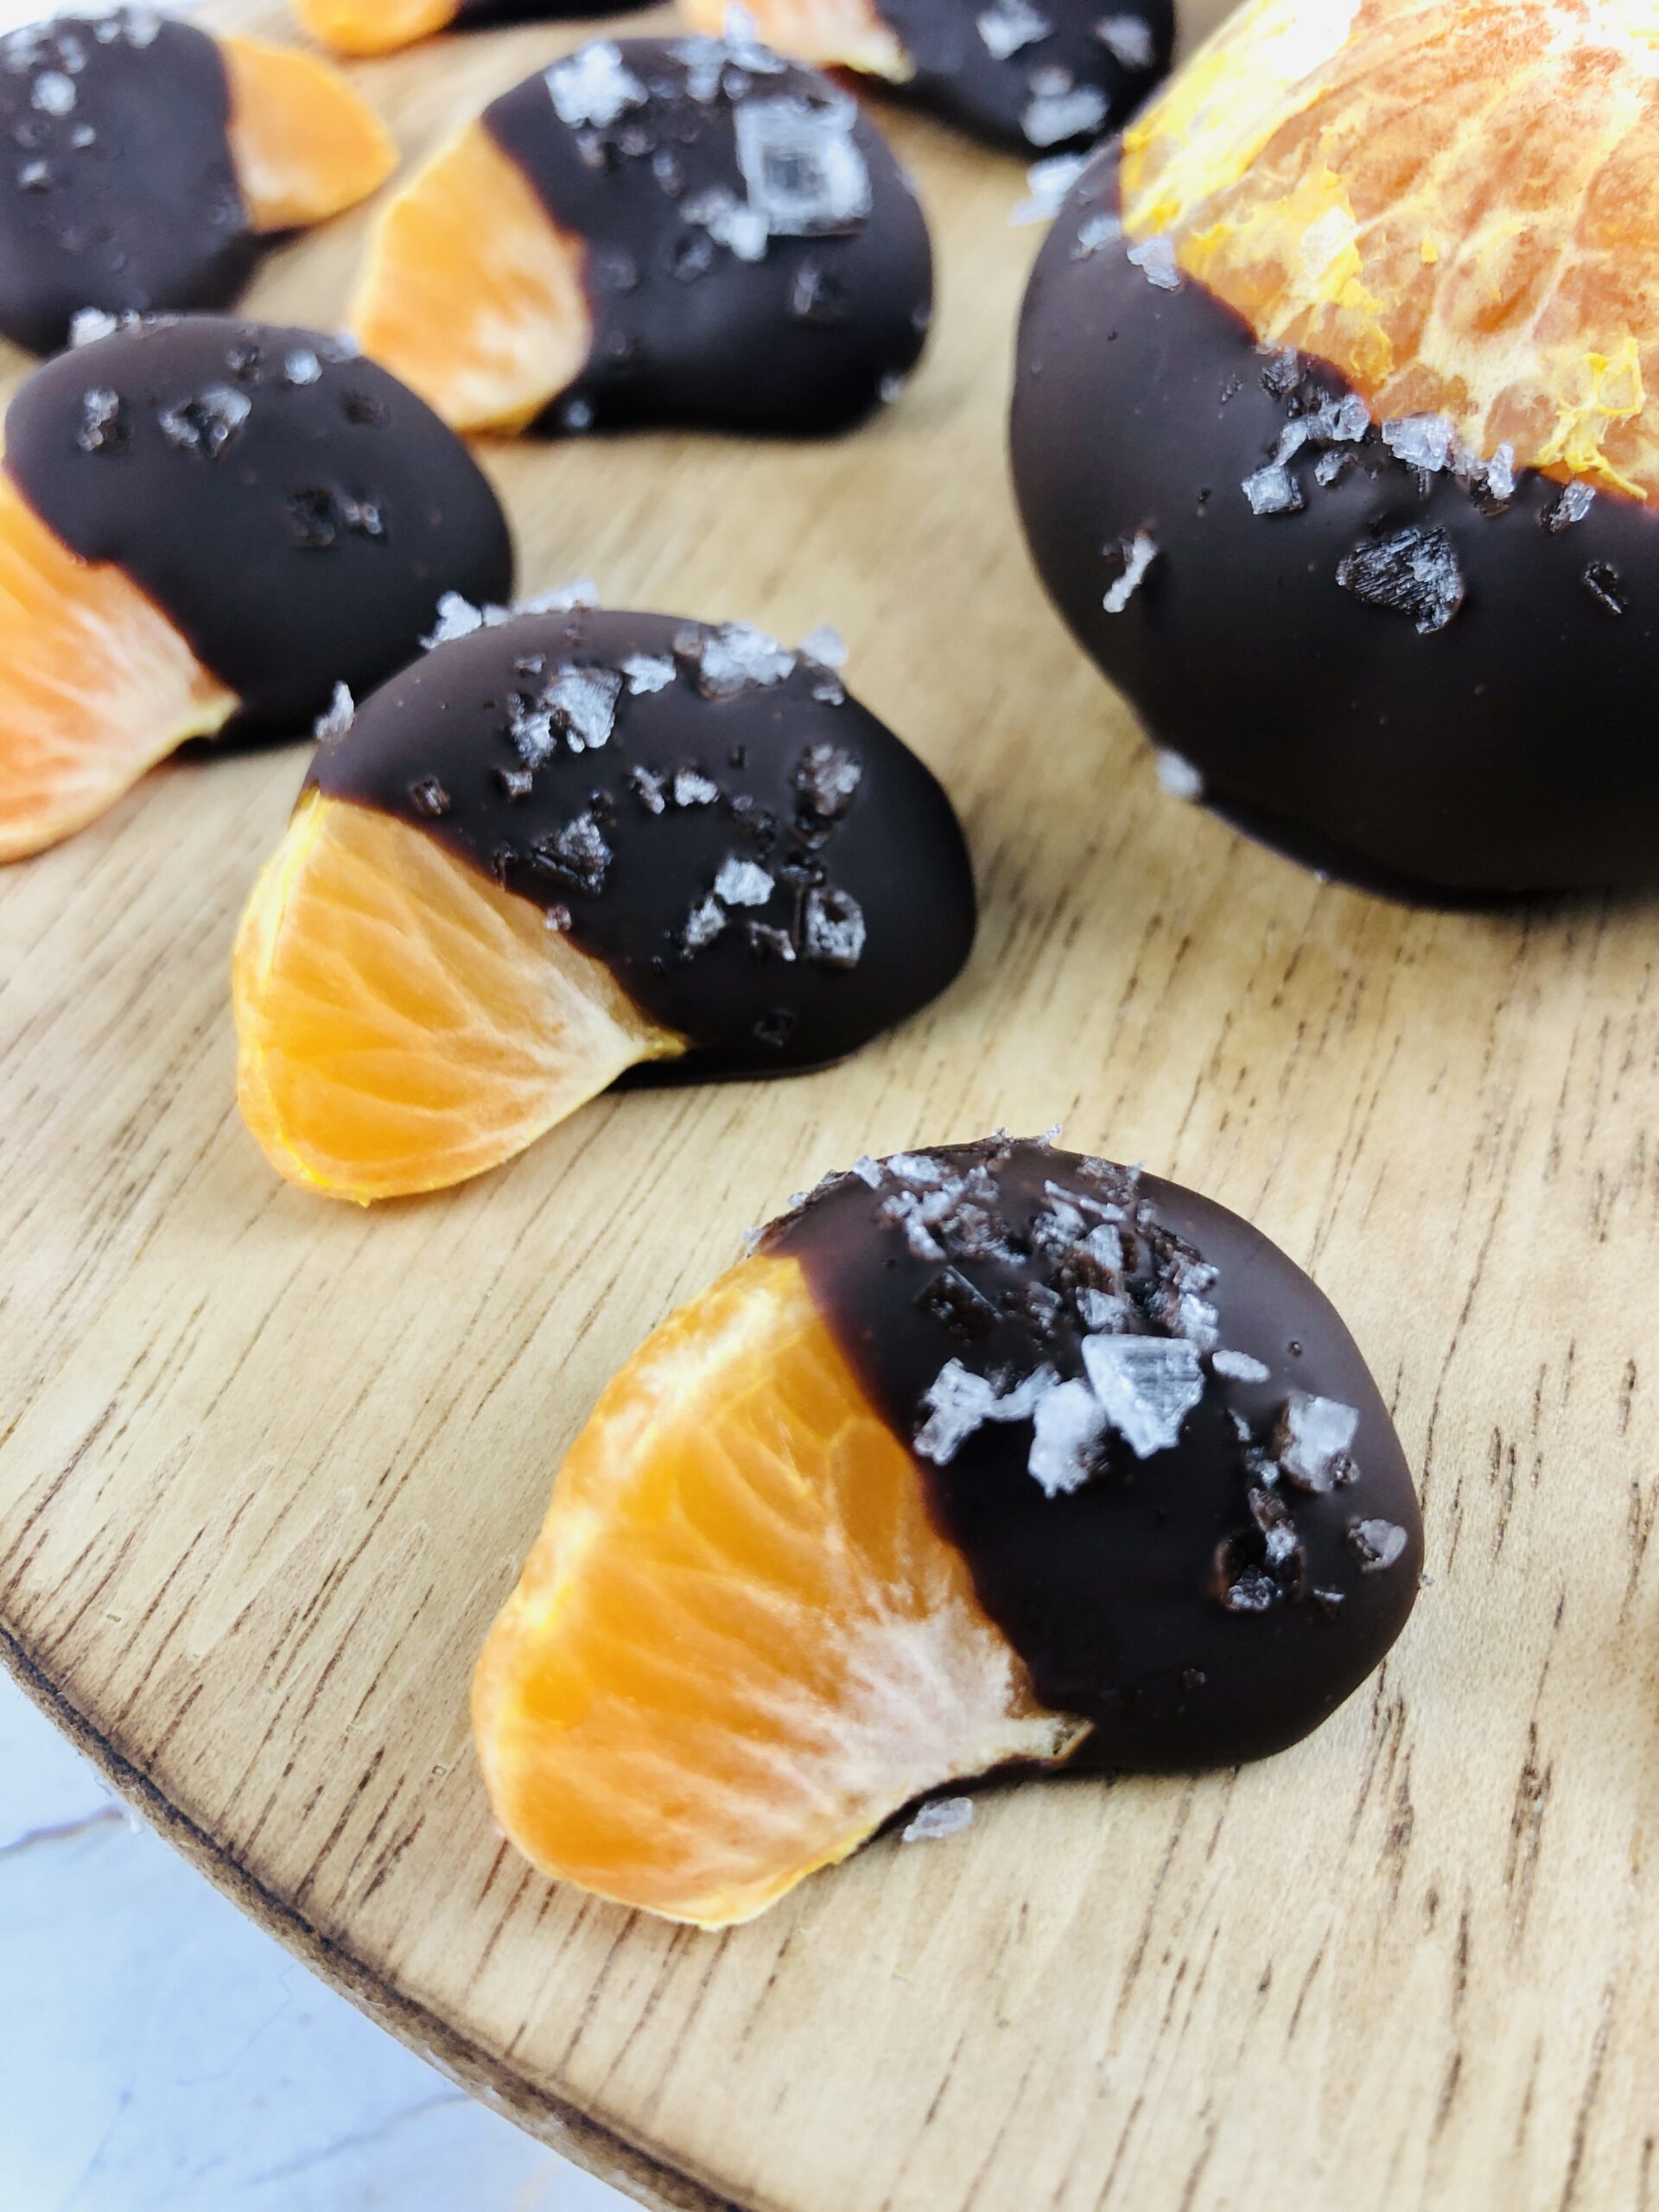 a group of the orange slices covered in chocolate.